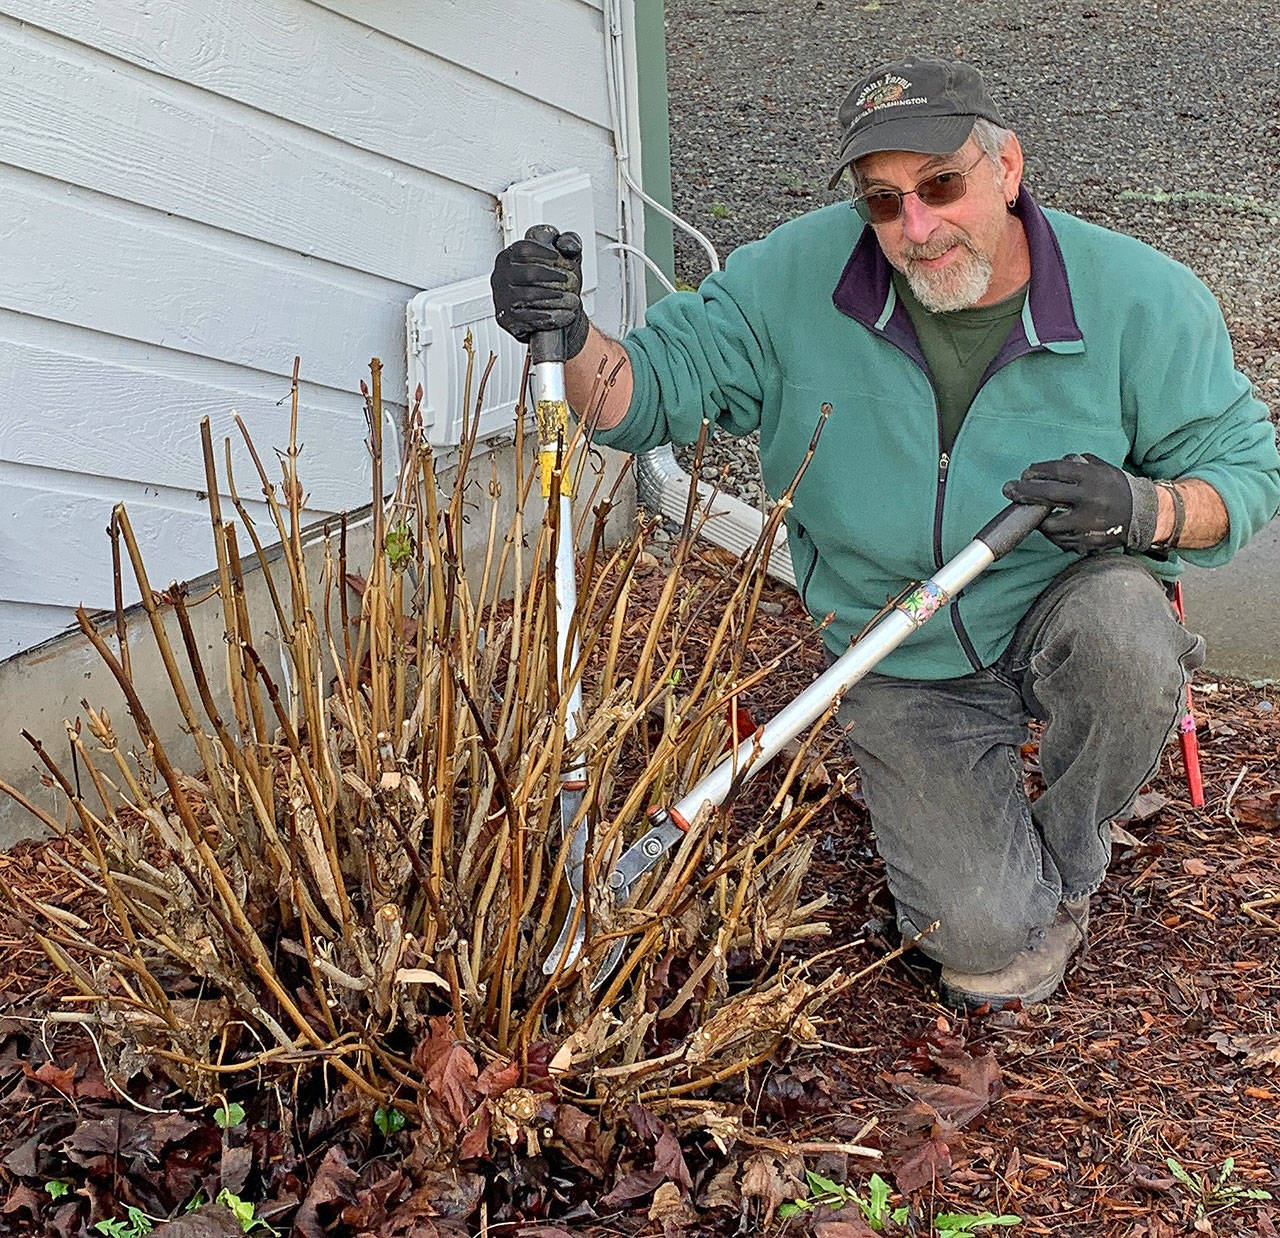 Keith Dekker, who will talk about pruning ornamentals Thursday in the Clallam County Courthouse Commissioners’ Meeting Room, is pictured at a job site in Sequim pruning a hydrangea. (Submitted photo)